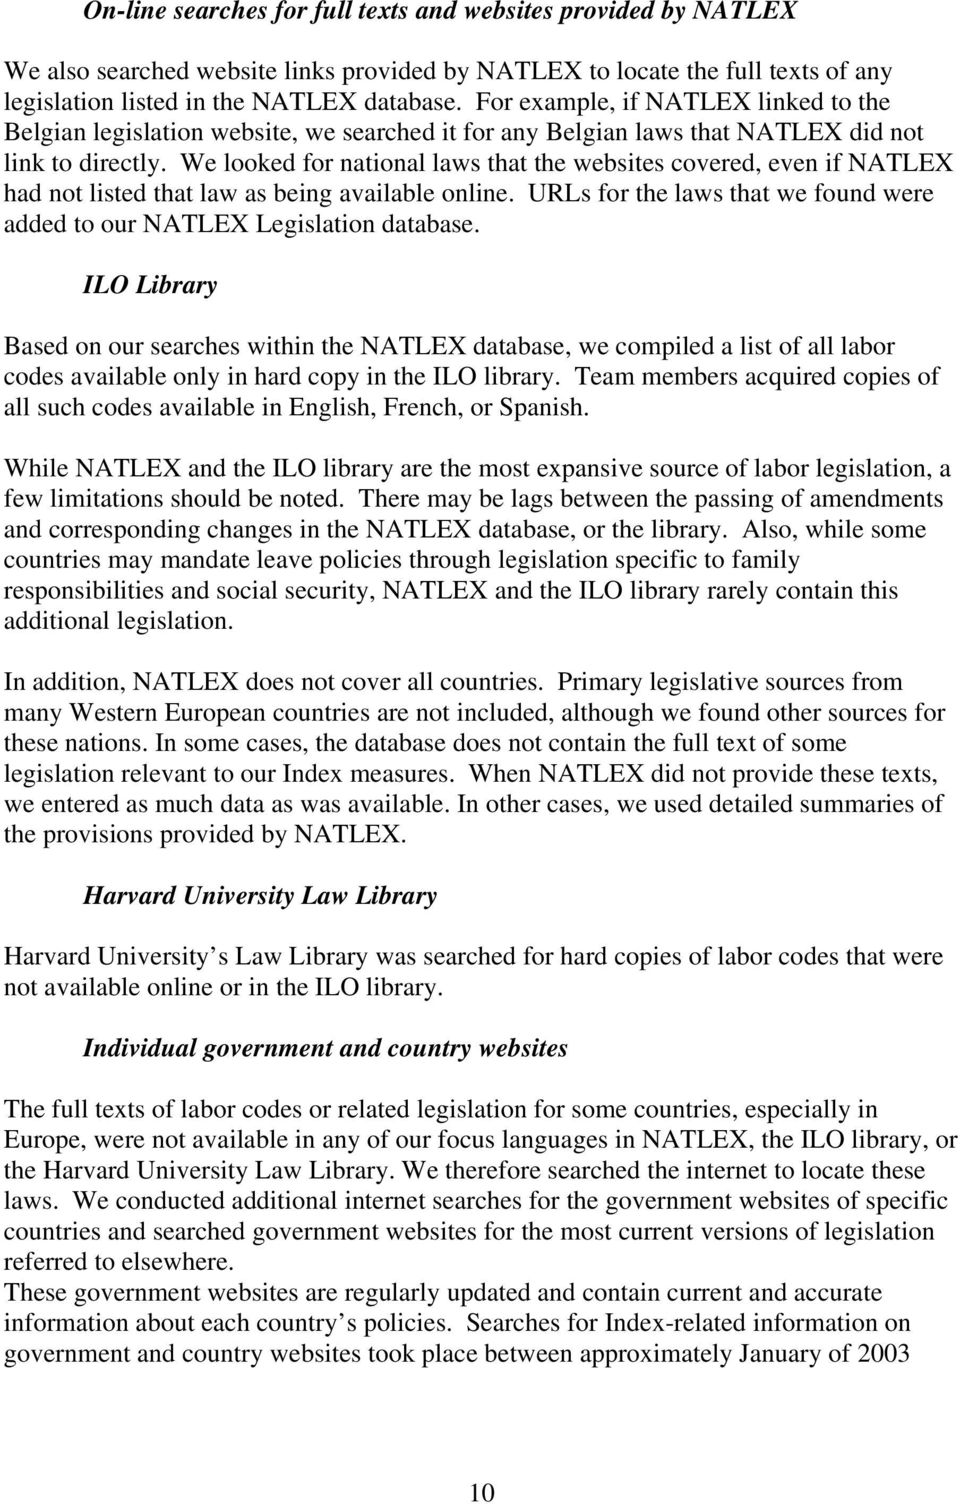 We looked for national laws that the websites covered, even if NATLEX had not listed that law as being available online. URLs for the laws that we found were added to our NATLEX Legislation database.